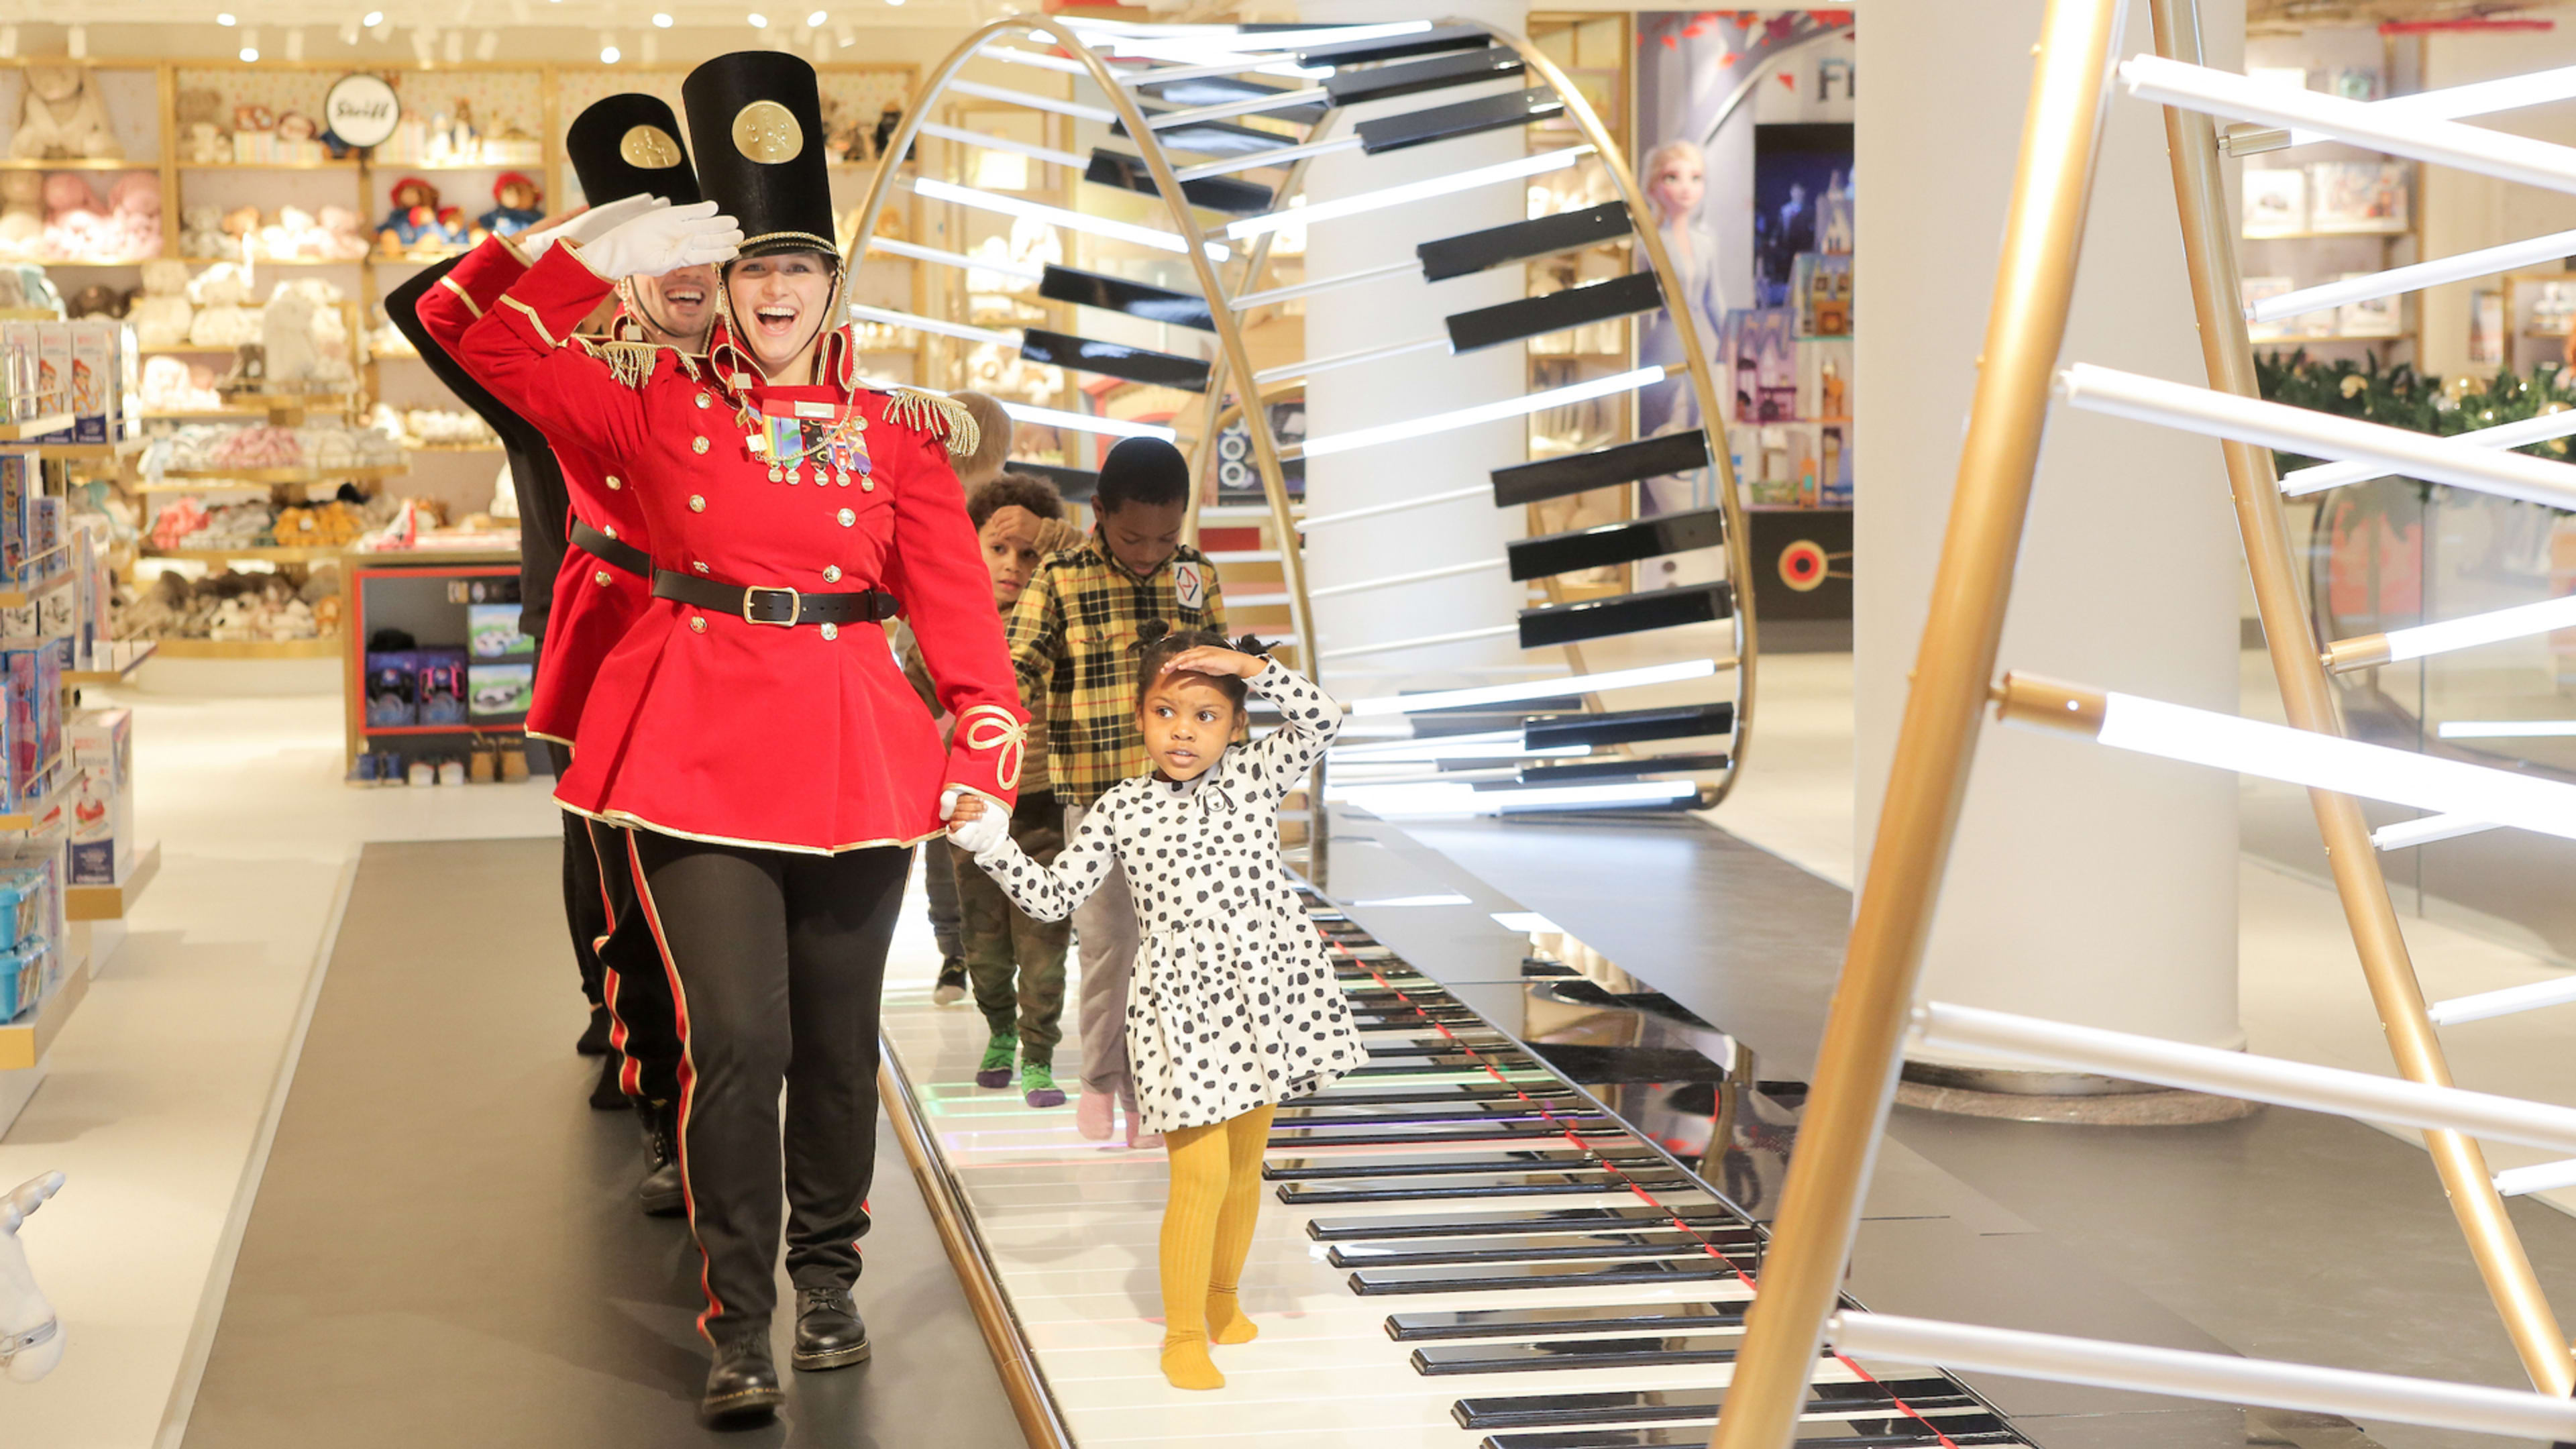 FAO Schwarz is opening two stores in Europe. Yes, you can dance on the pianos